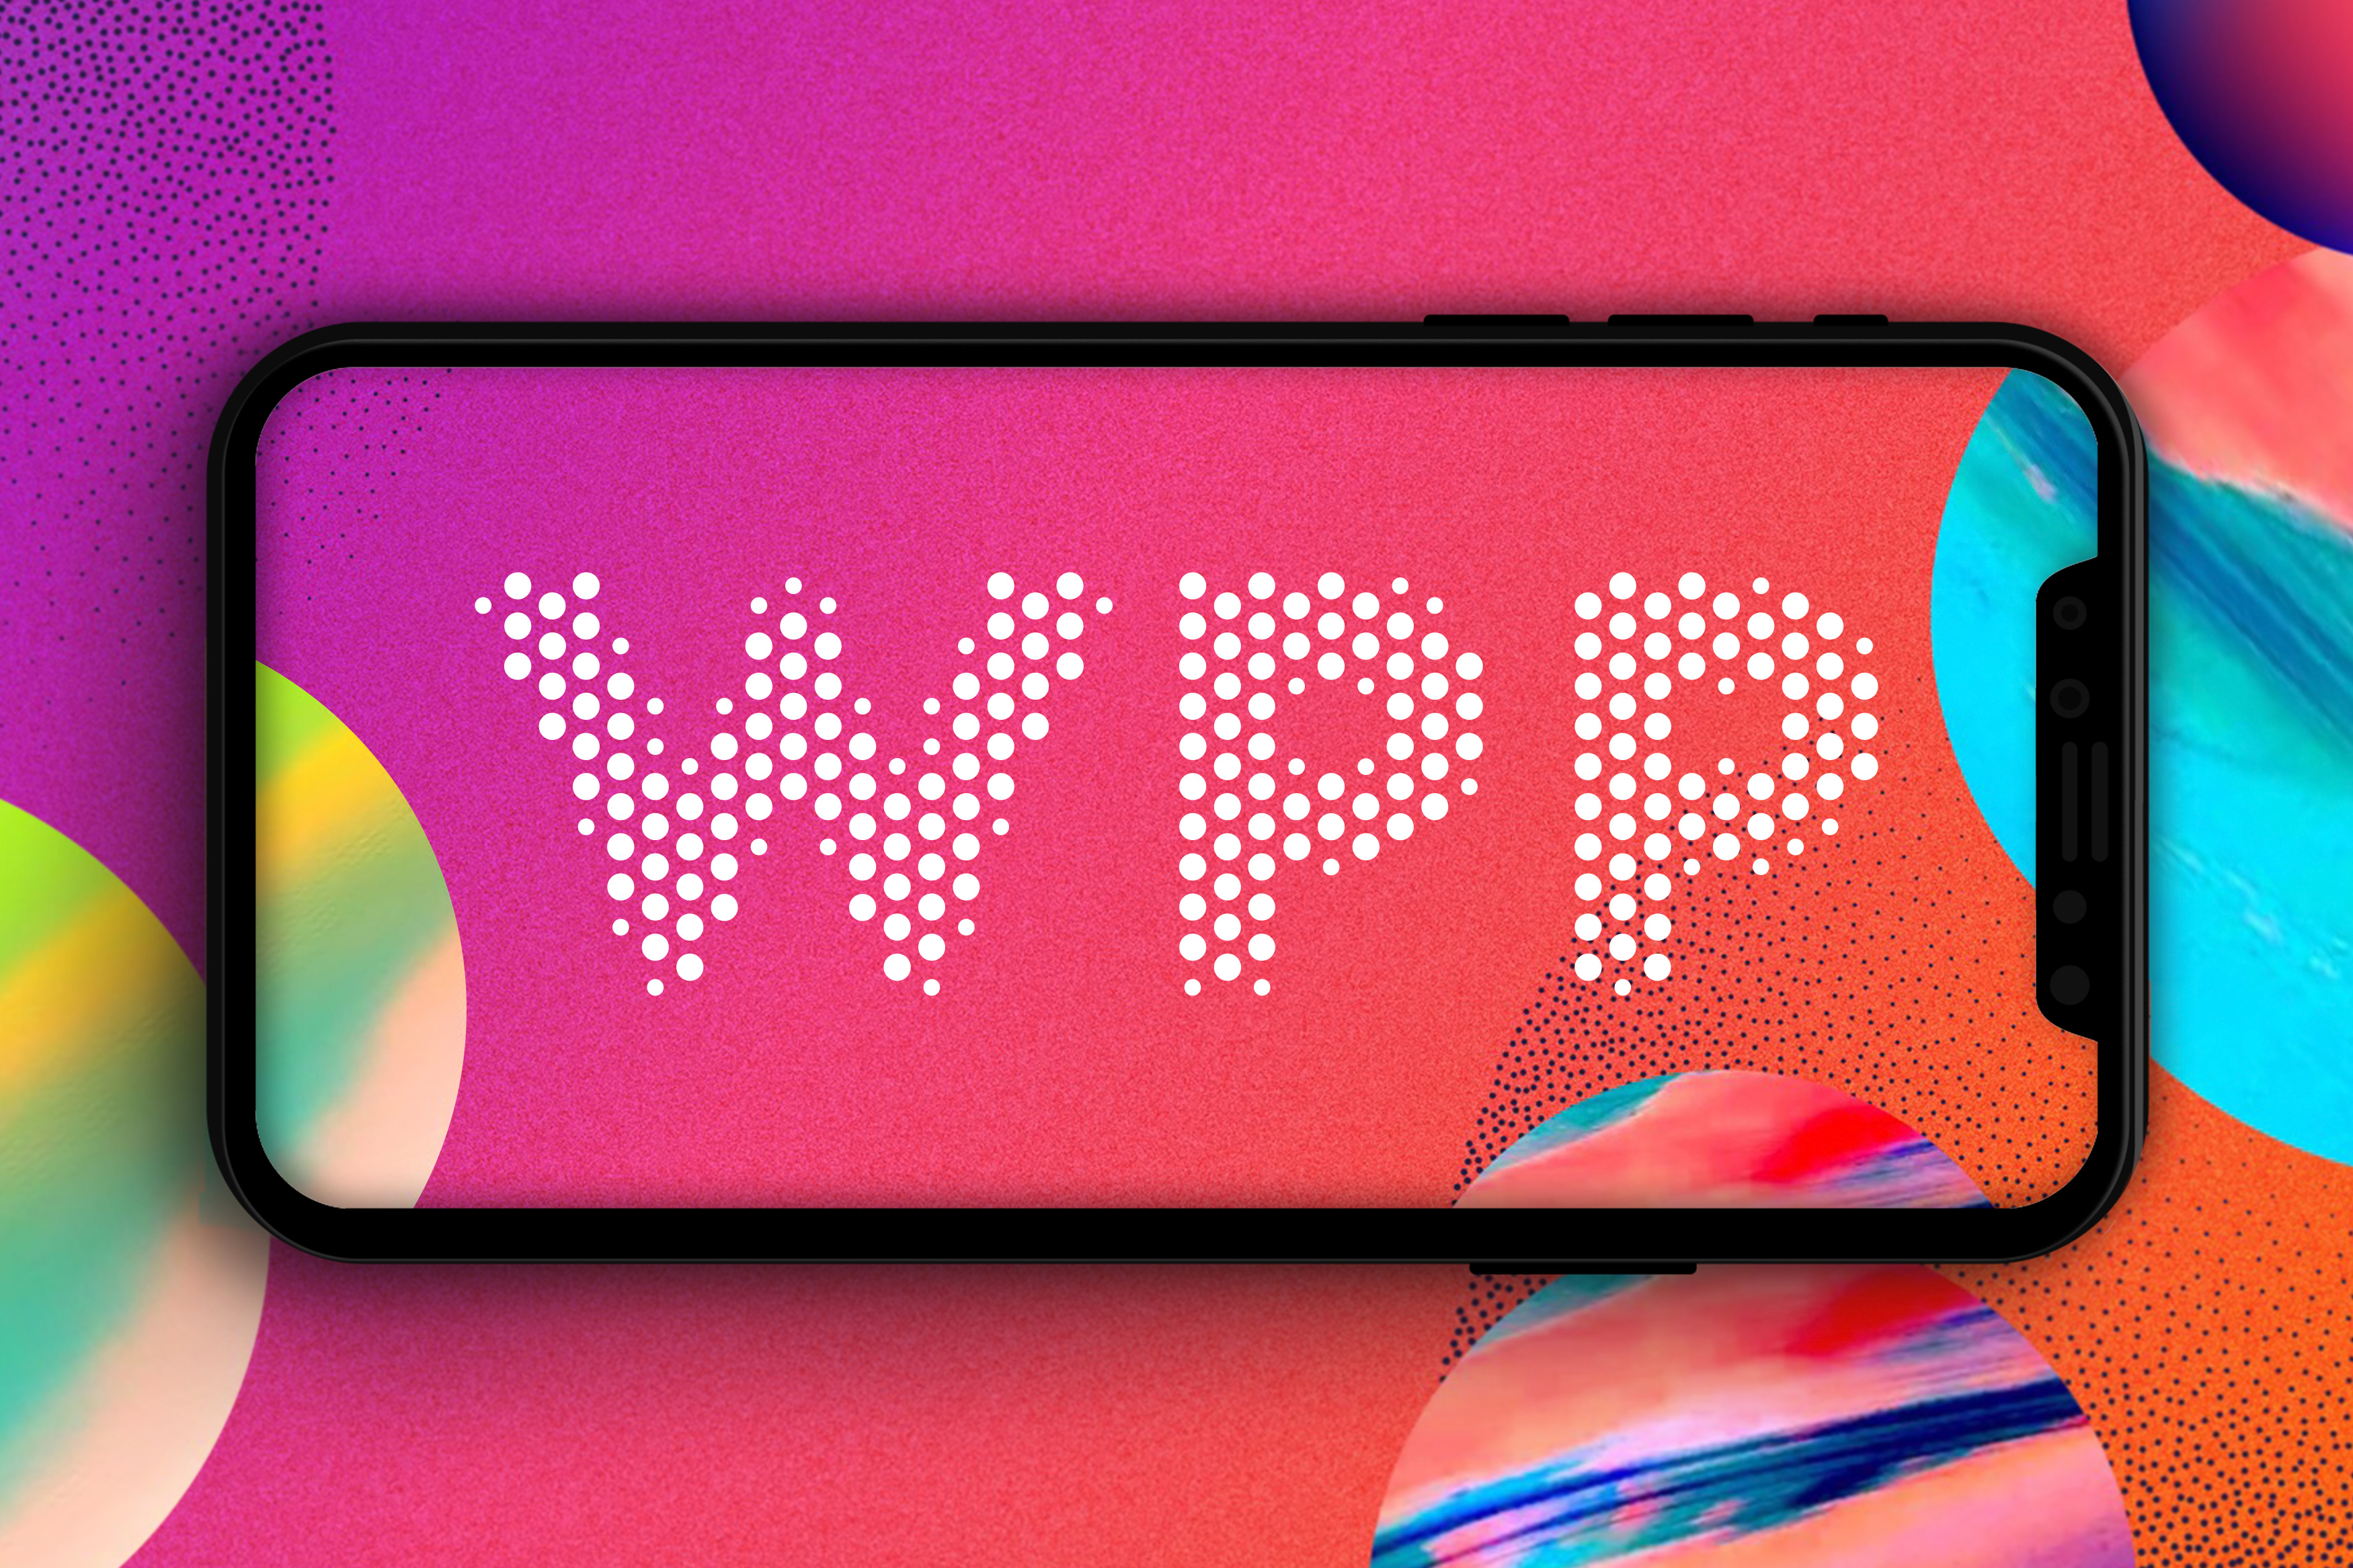 Pink background with obs, with WPP logo on phone screen